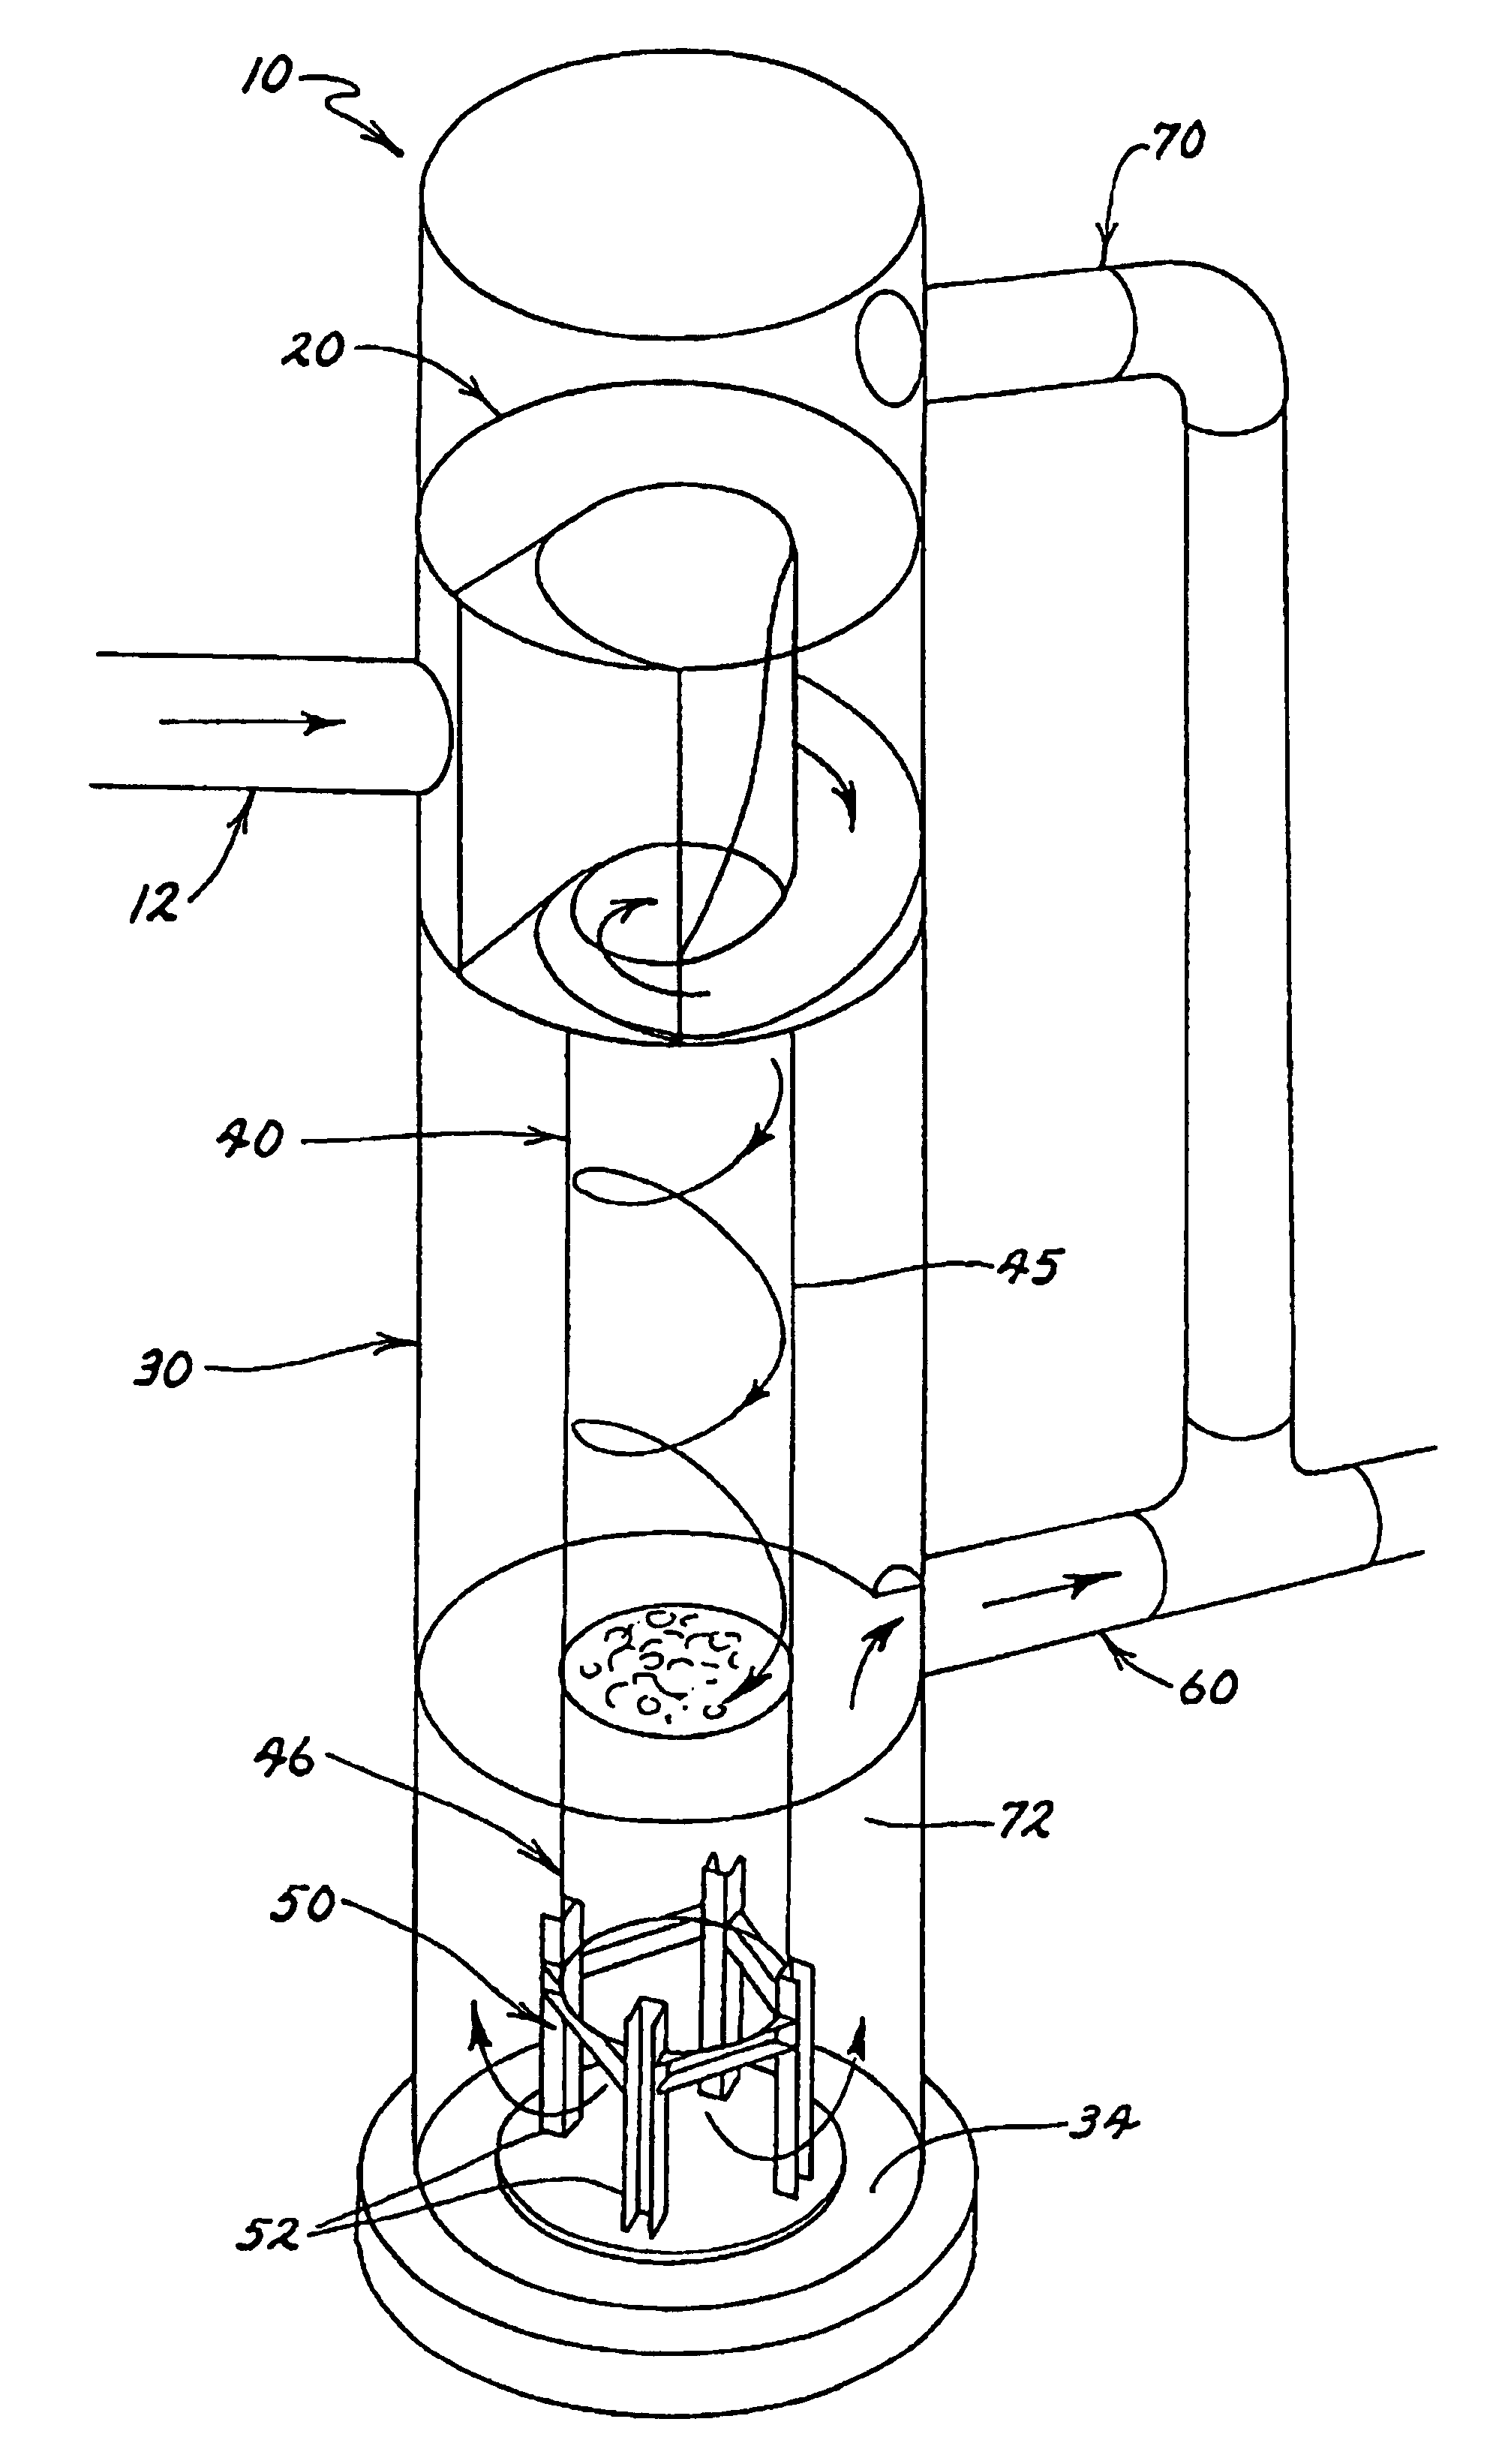 Method and apparatus for mixing fluids